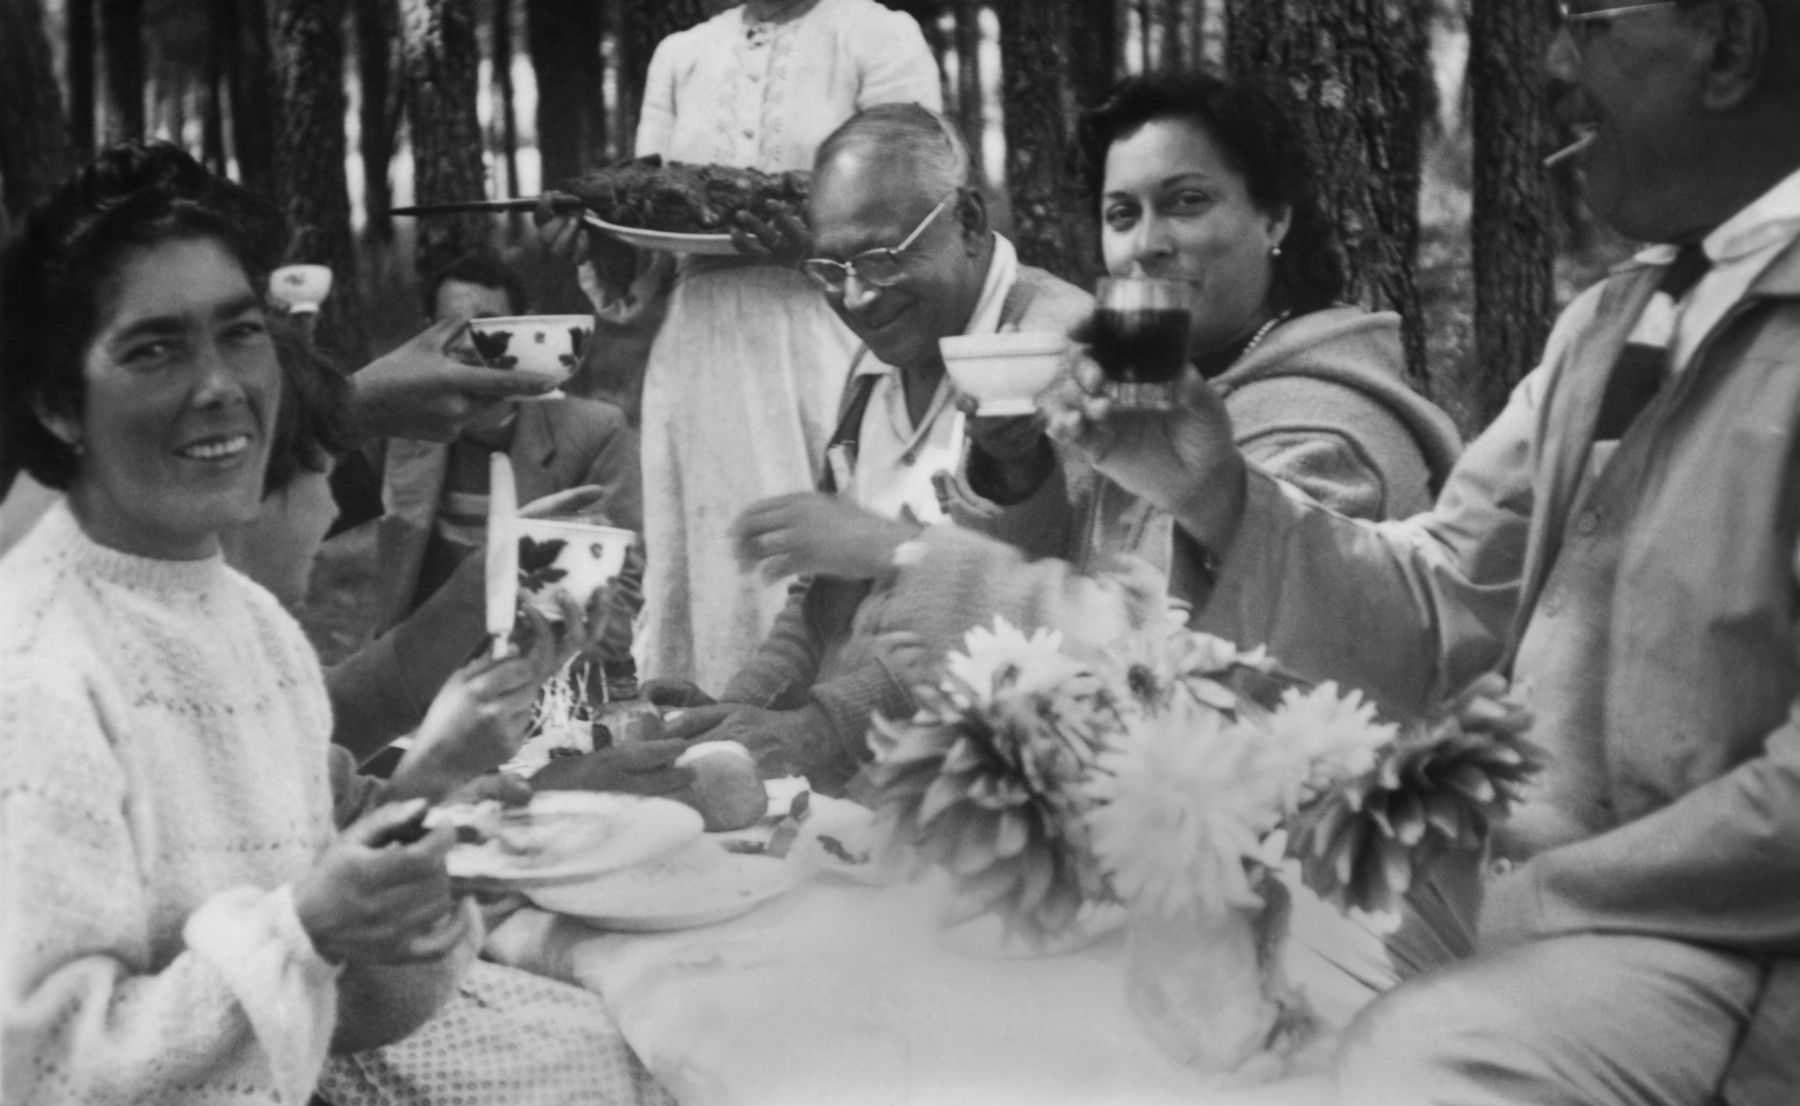 A Toast to this Moment, Somewhere in Portugal, circa 1940